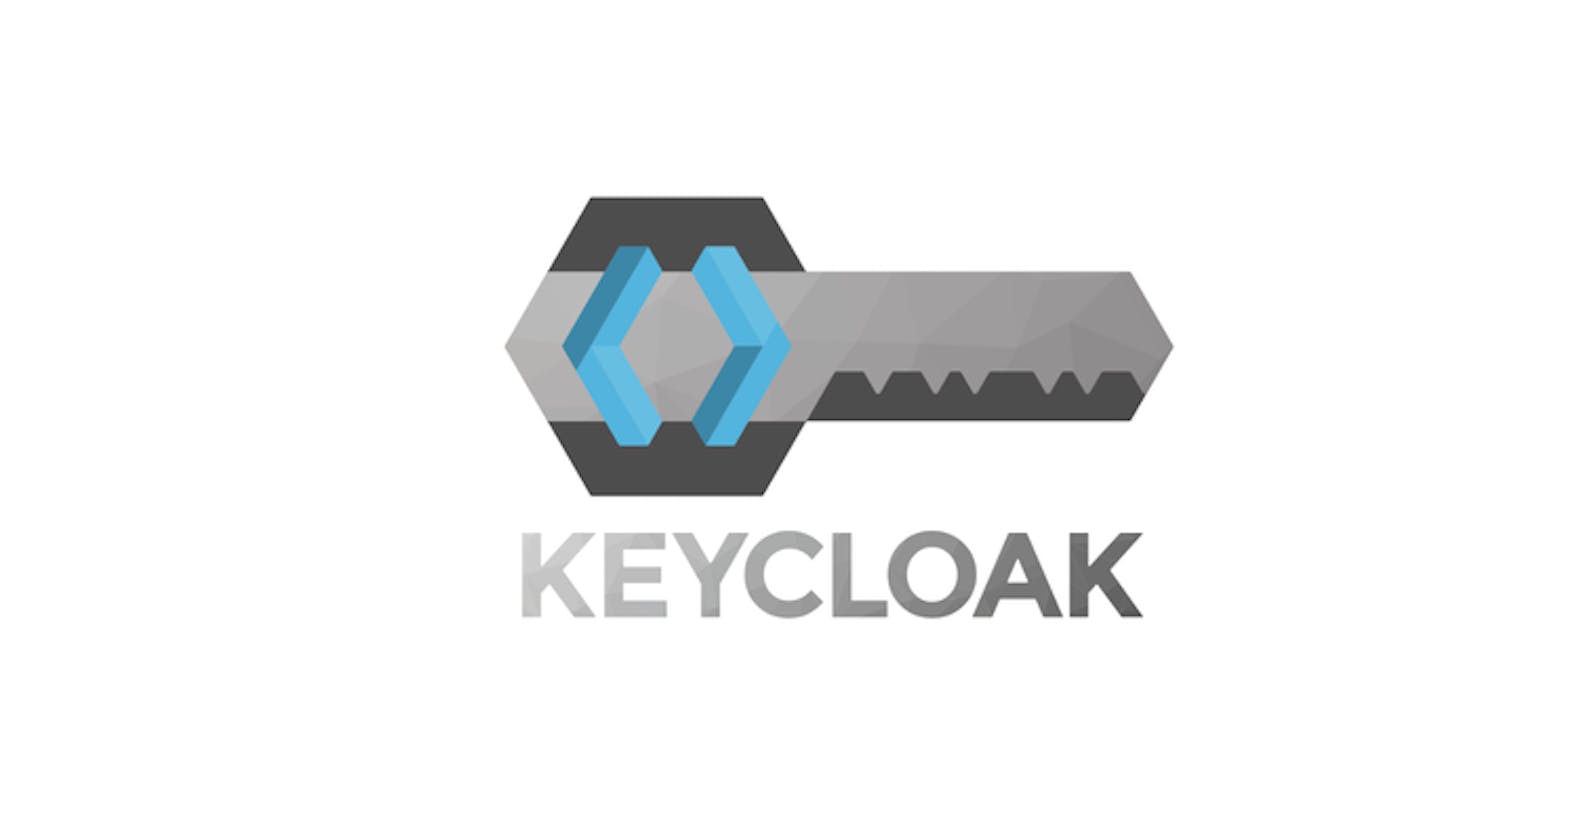 Introduction to Keycloak